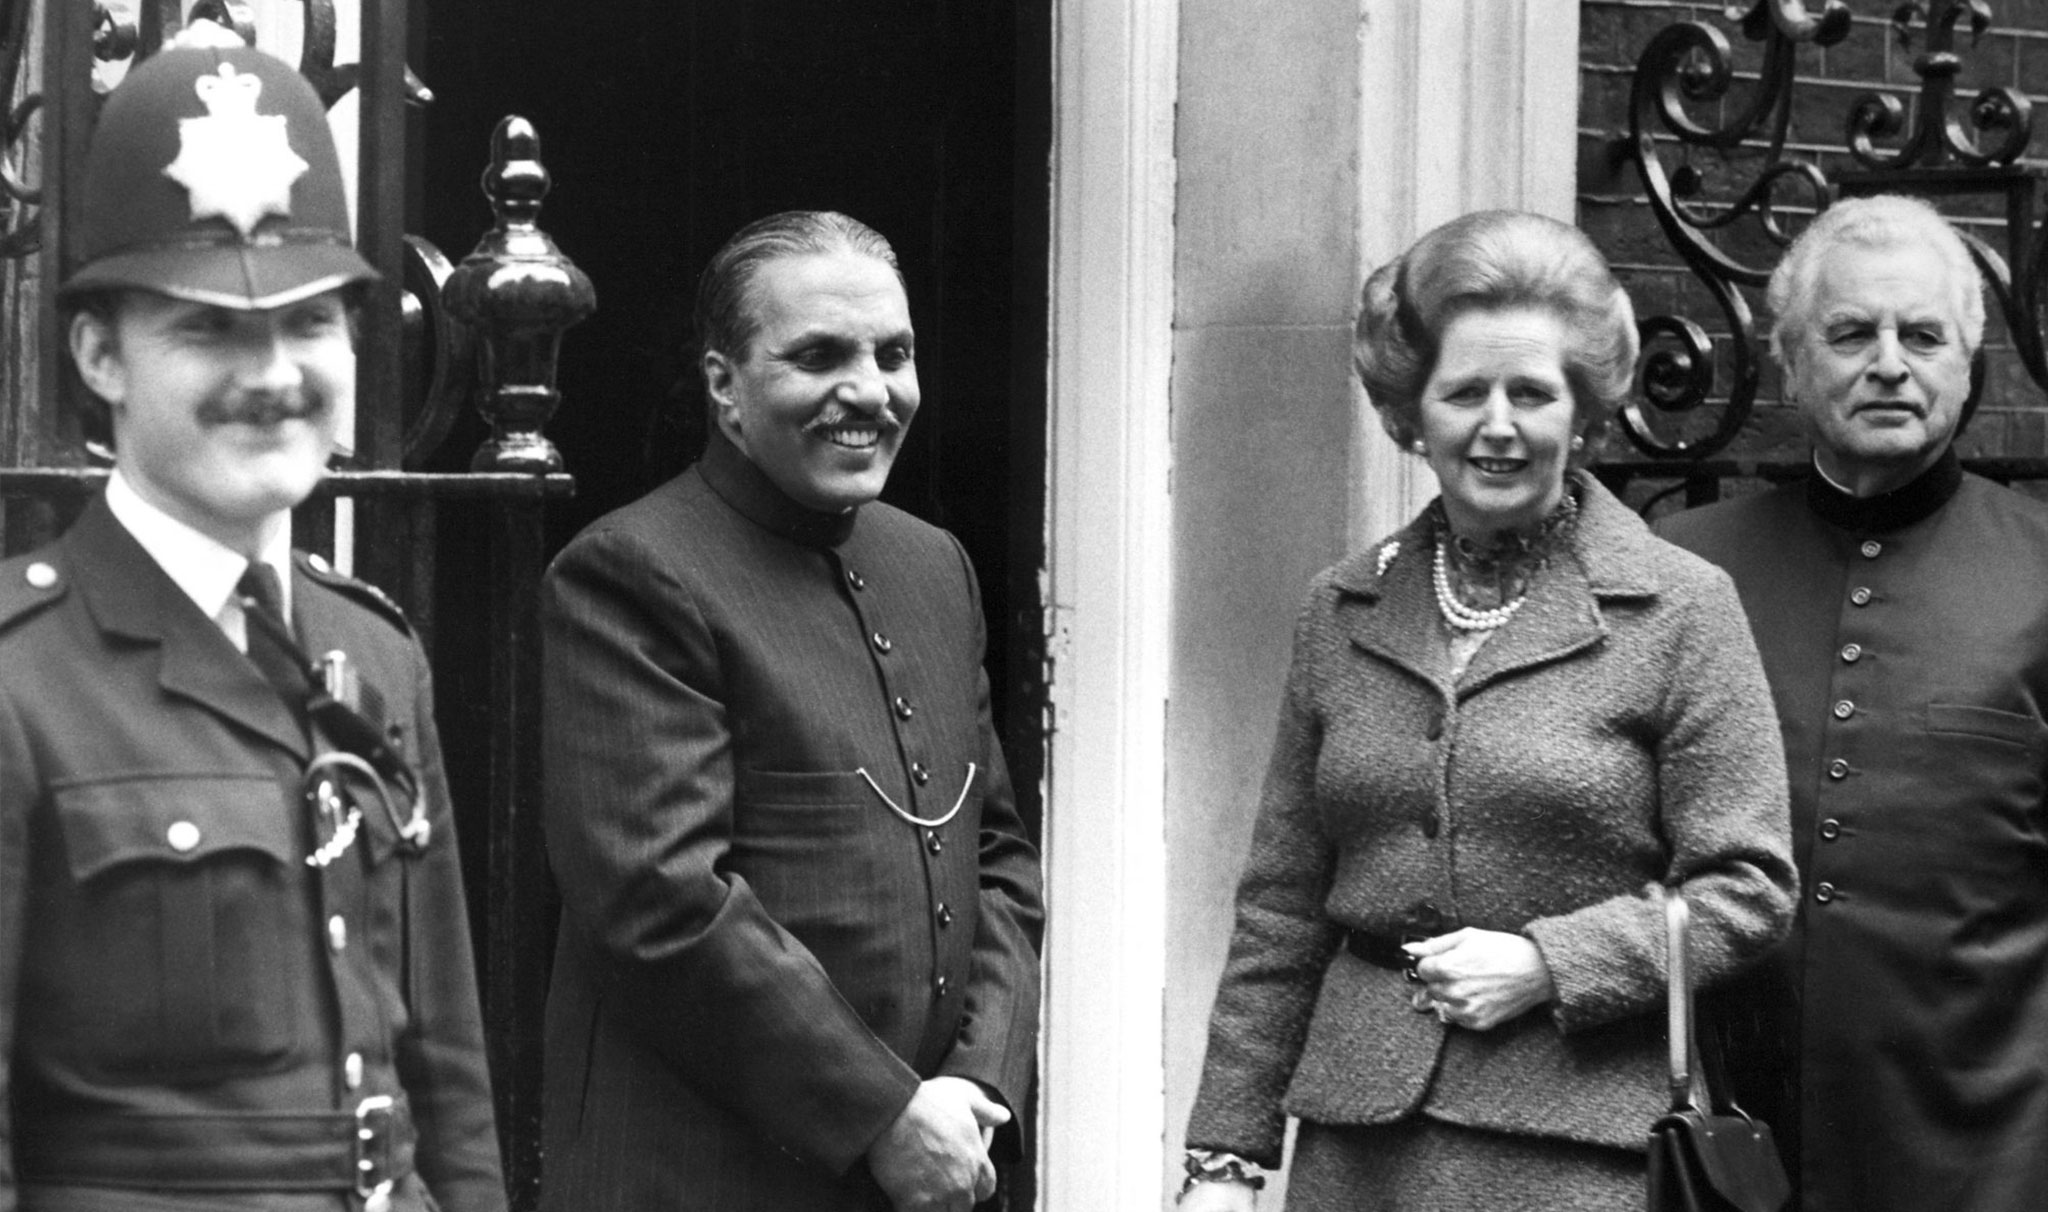 Margaret Thatcher receives Prime Minister of Pakistan Zia Ul-Haq at 10 Downing Street in London on October 6, 1980, UK.